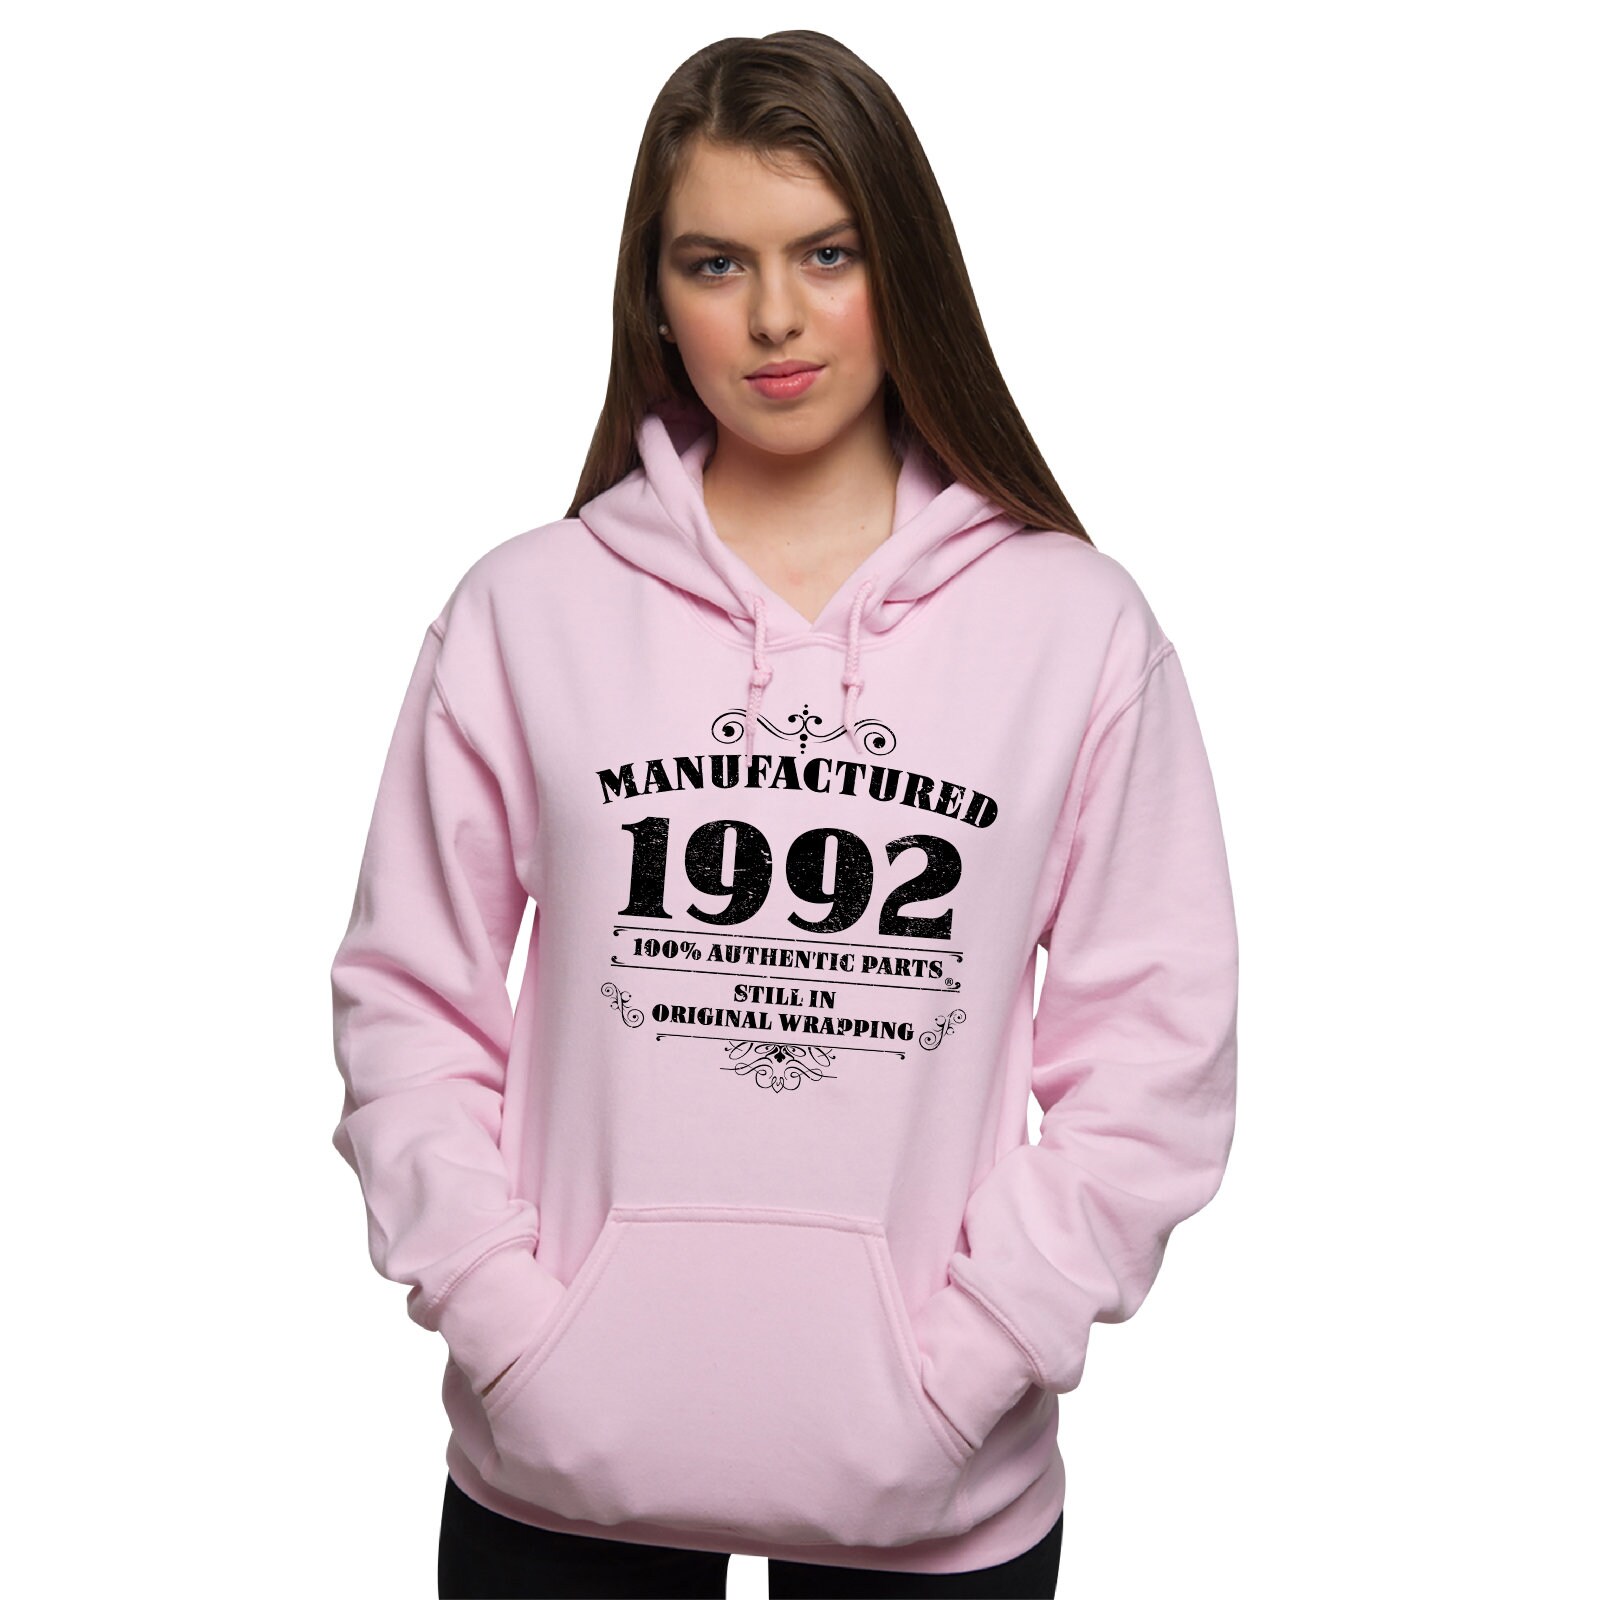 Awesome 30th 1992 Shirt For Her Him 1992 Birthday Year Number Sweatshirt for Women Cute Birthday Gift Womens 30th Birthday Sweater